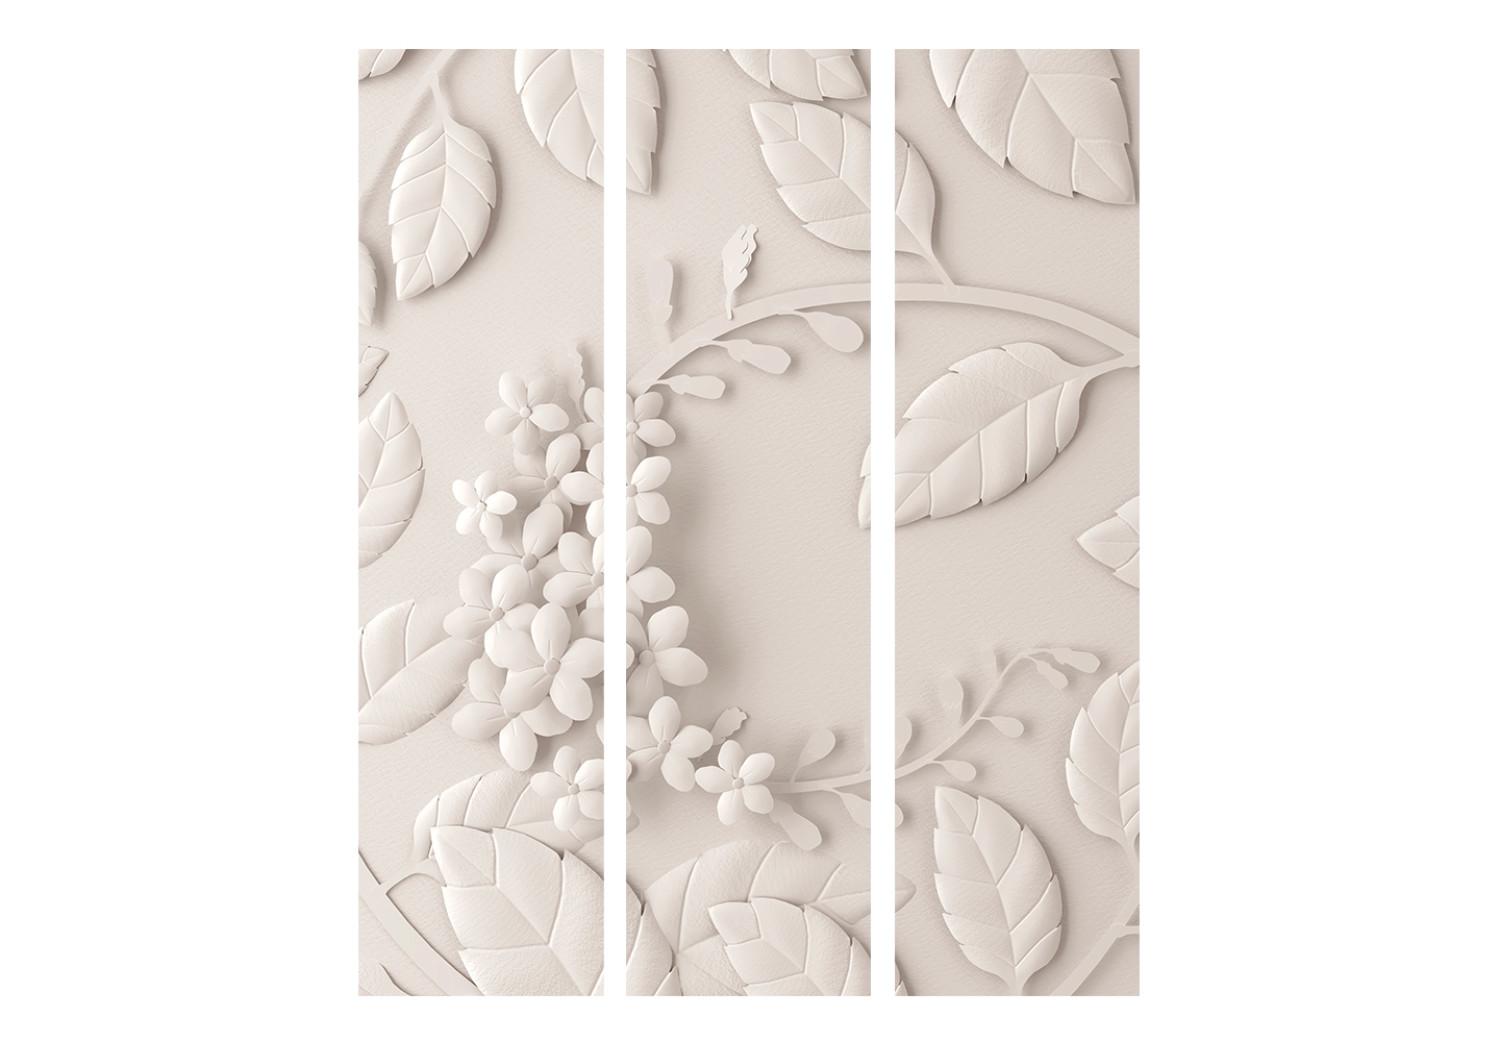 Room Divider Paper Flowers (Cream) - plant motif in 3D illusion on a beige background